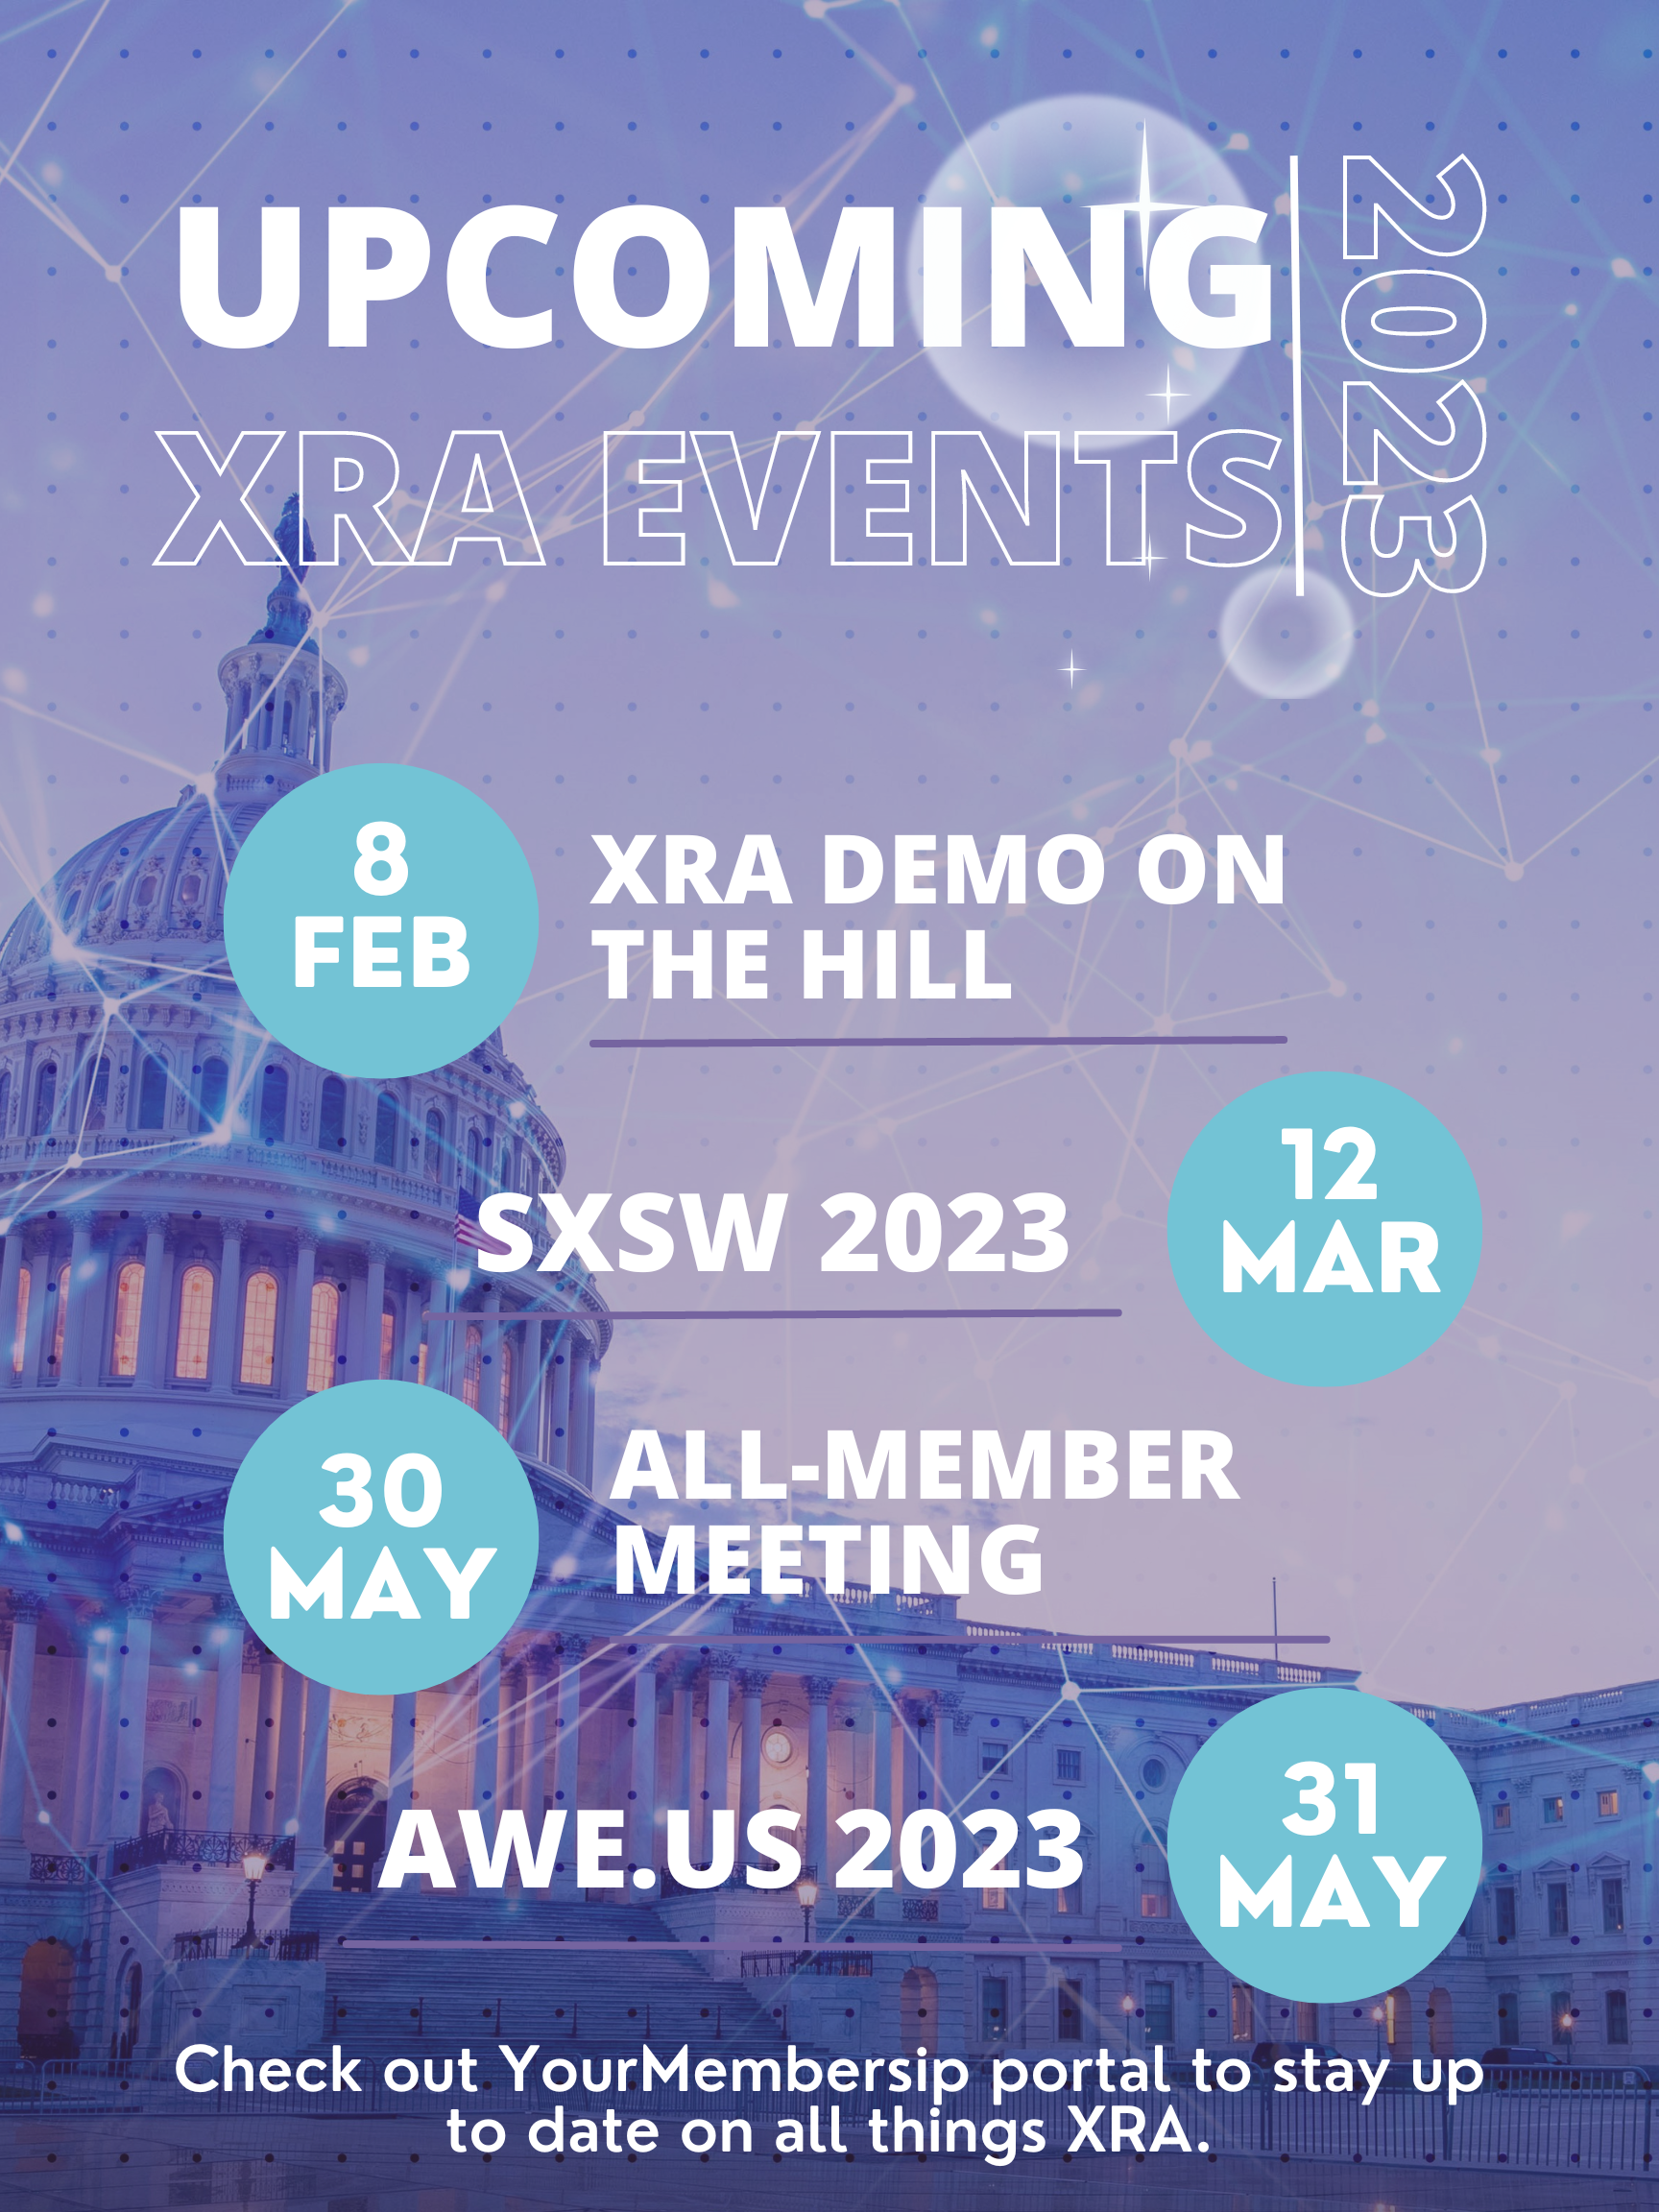 XR ASSOCIATION HIGHLIGHTS UPCOMING EVENTS IN 2023